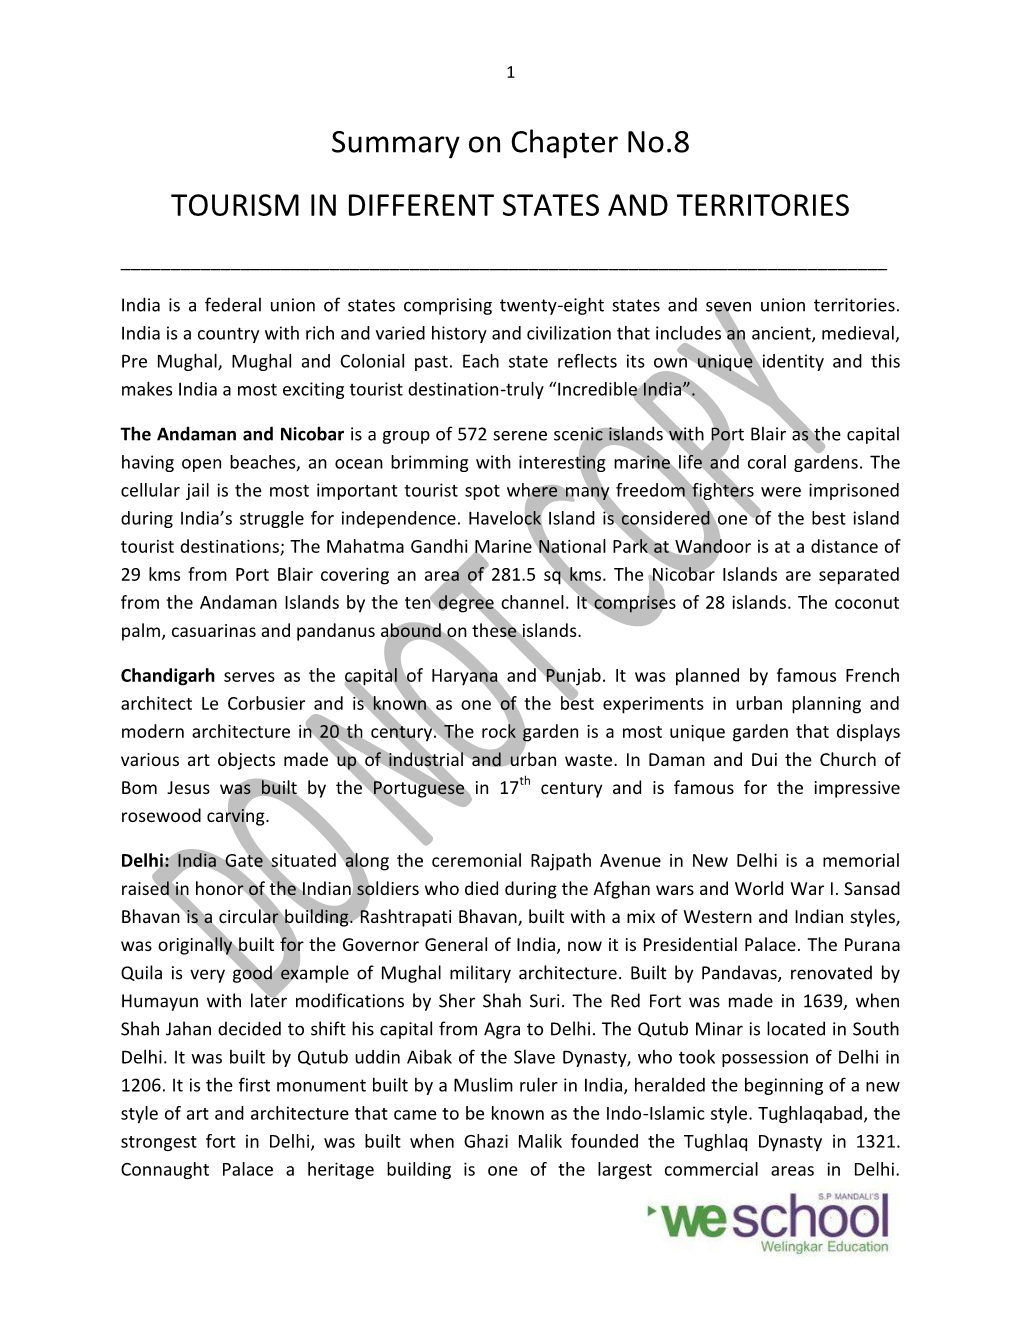 Summary on Chapter No.8 TOURISM in DIFFERENT STATES and TERRITORIES